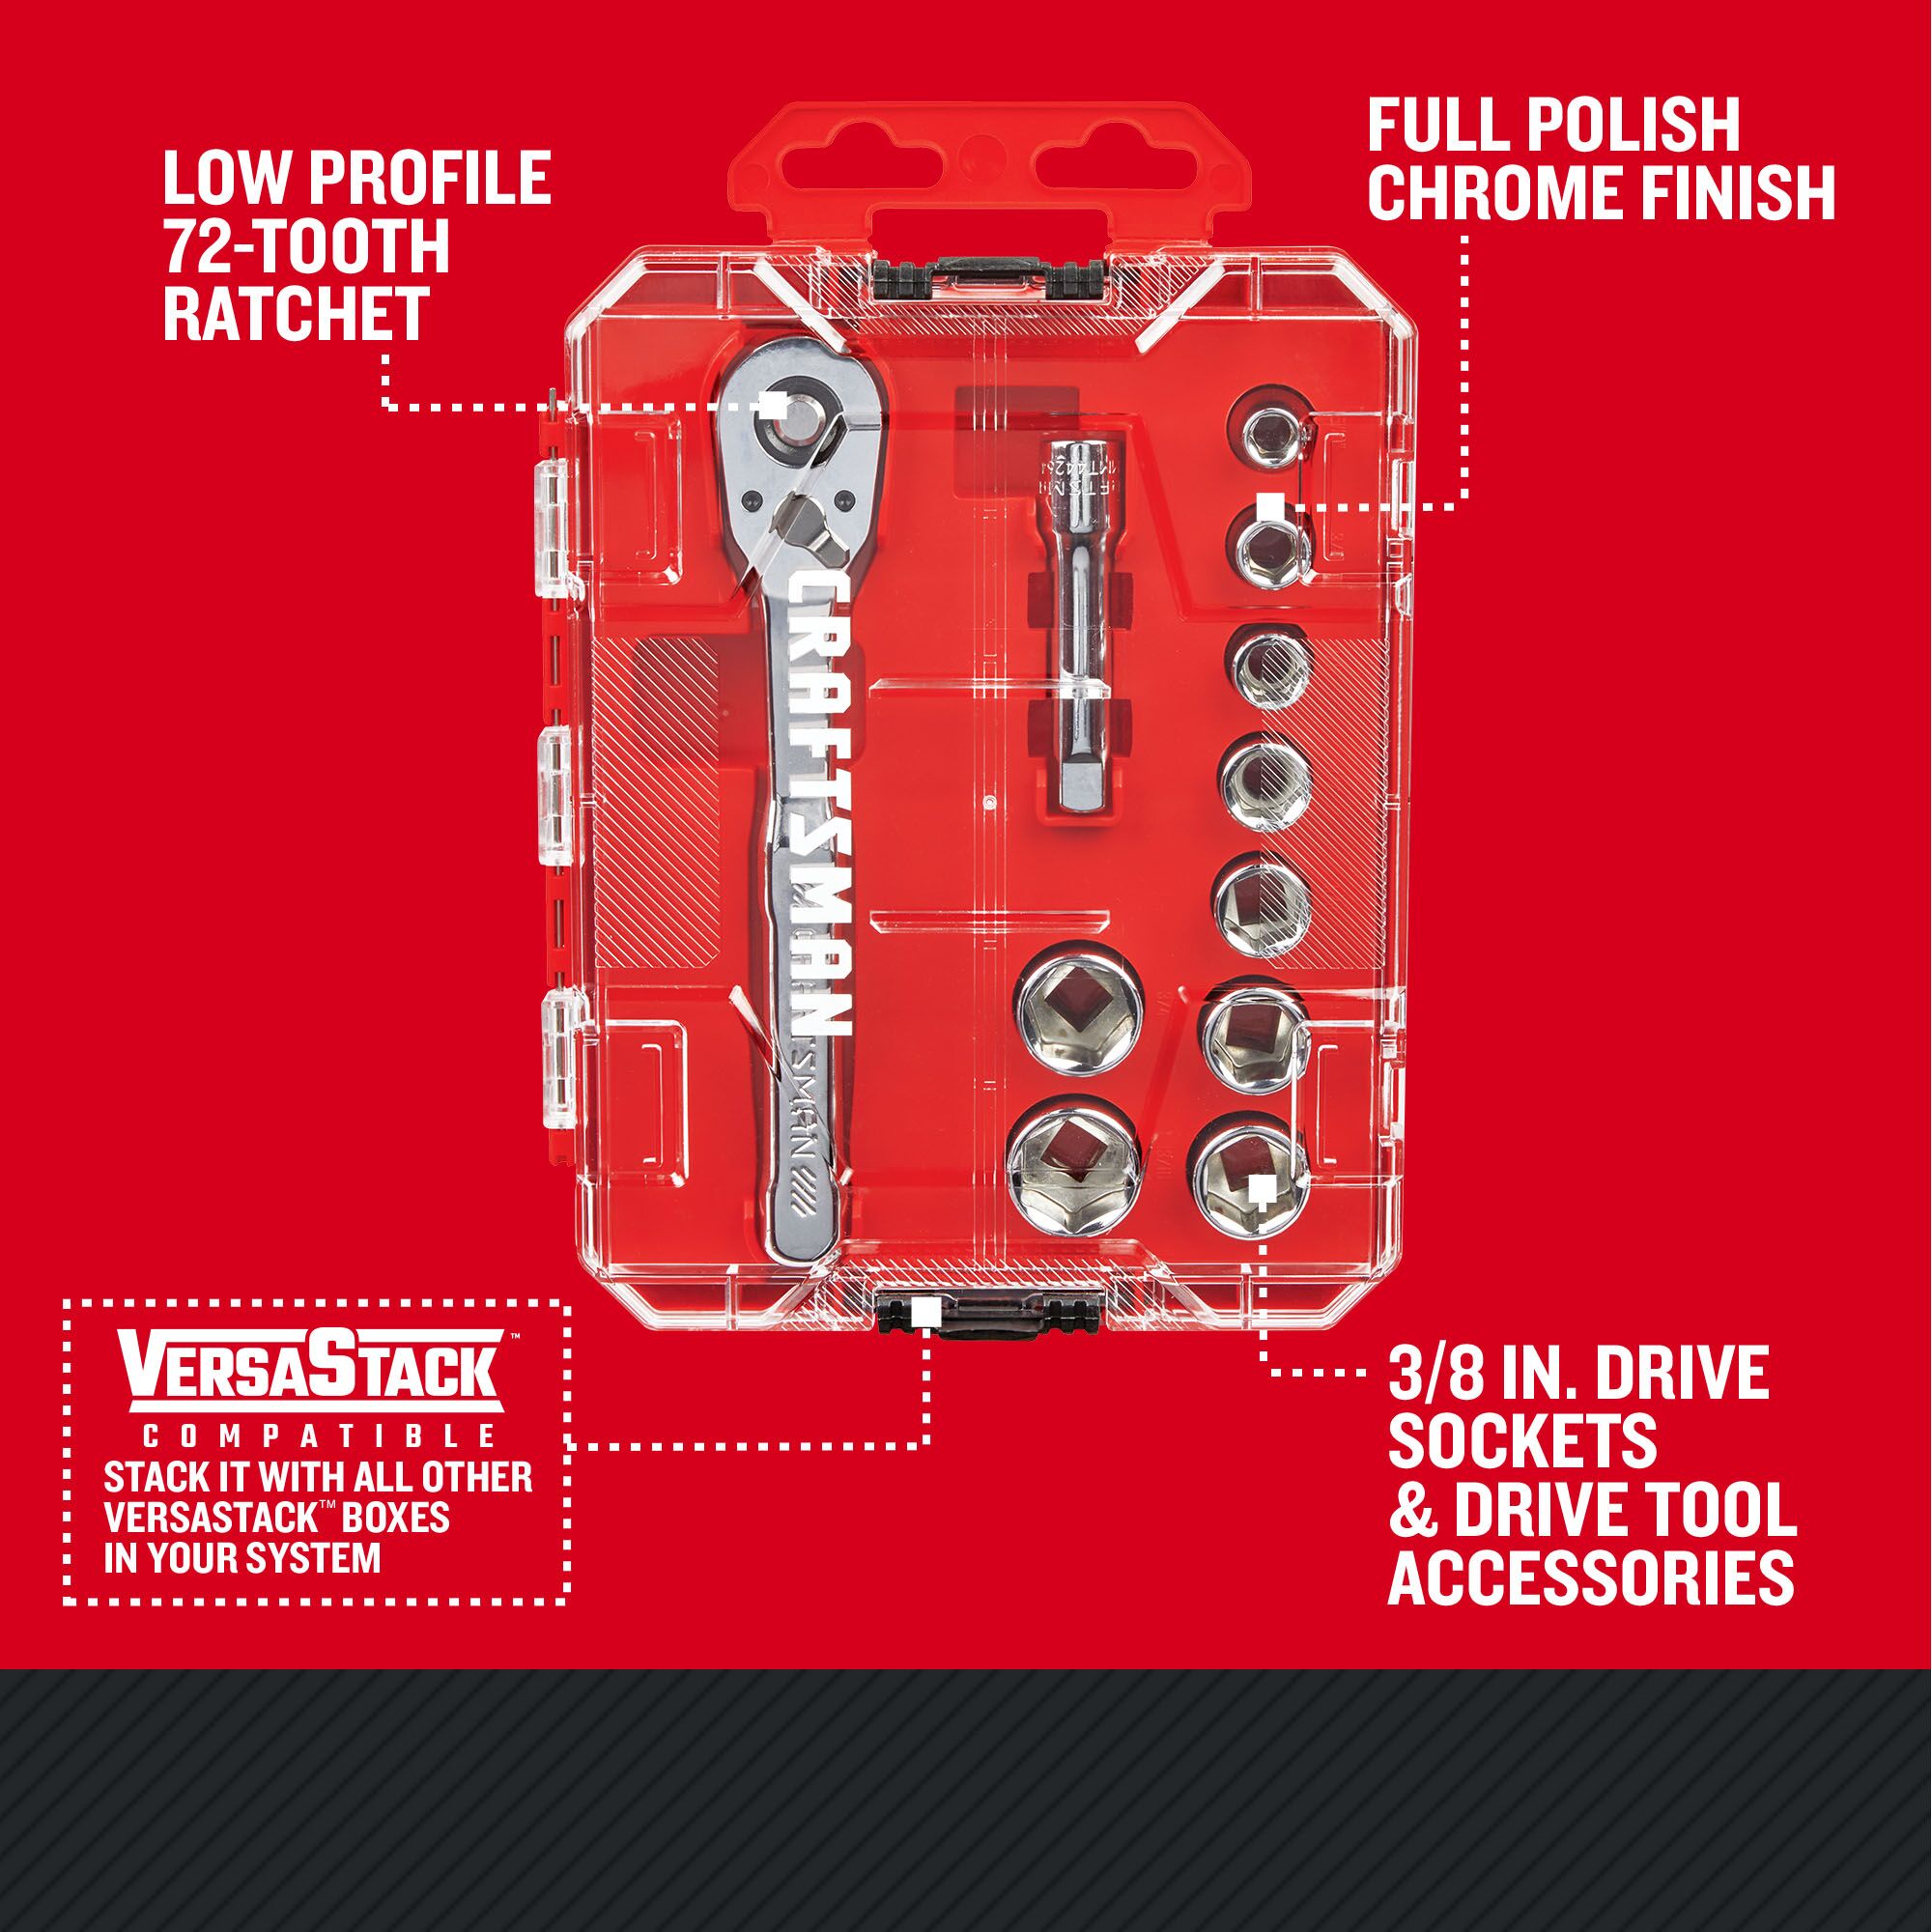 CRAFTSMAN Low Profile 11 piece 3/8 inch drive NANO MECHANICS TOOL SET with features and benefits highlighted